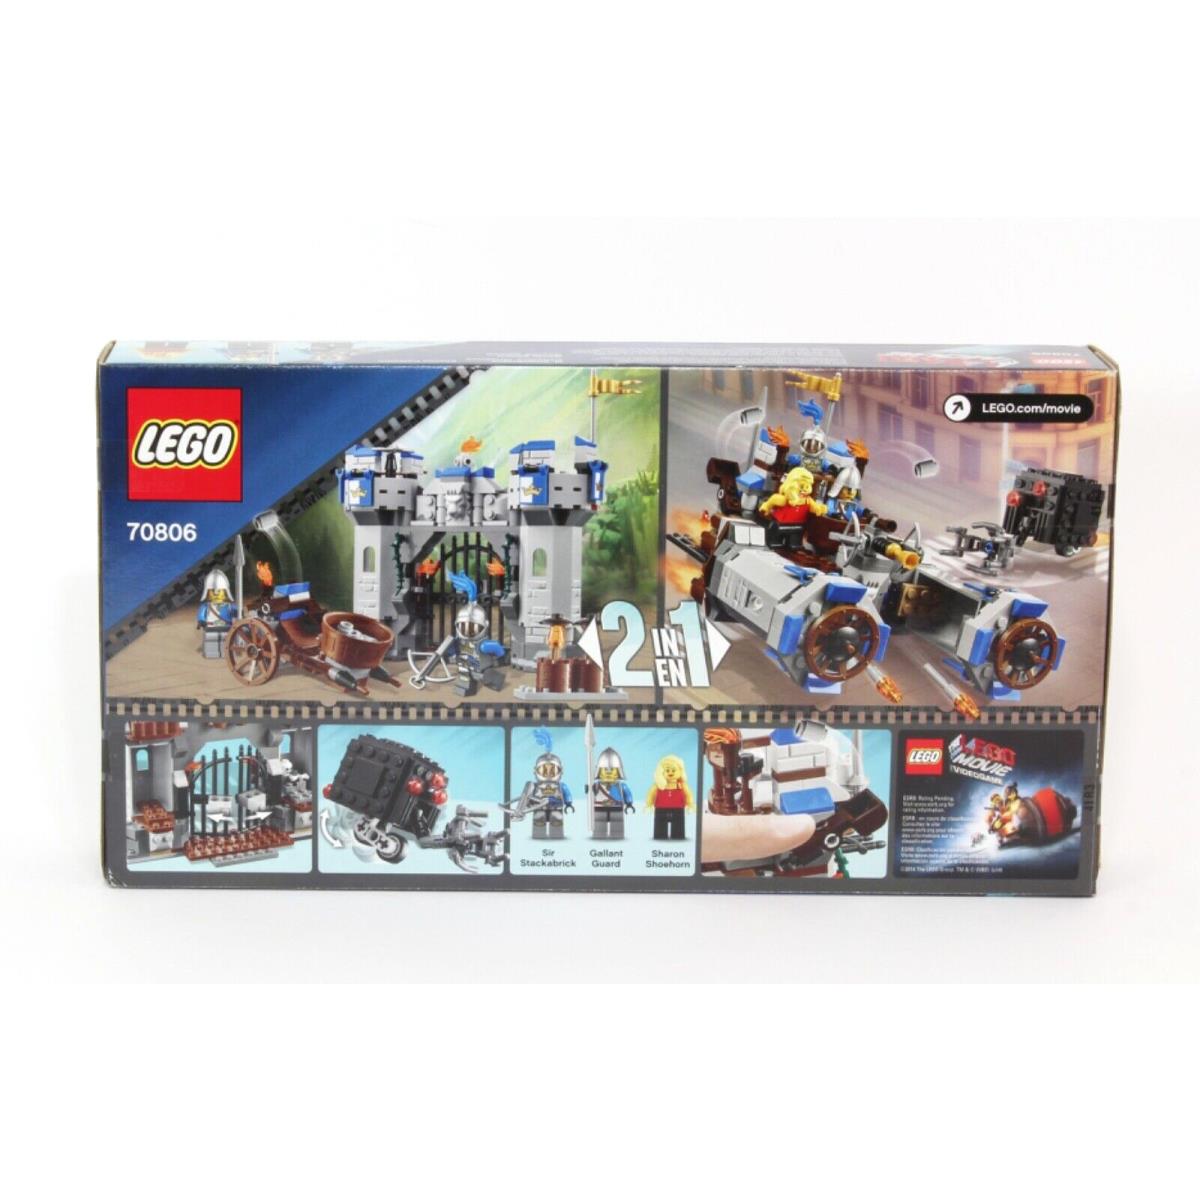 The Lego Movie Castle Cavalry - Set 70806 - Sir Stackabrick Sharon Shoehorn